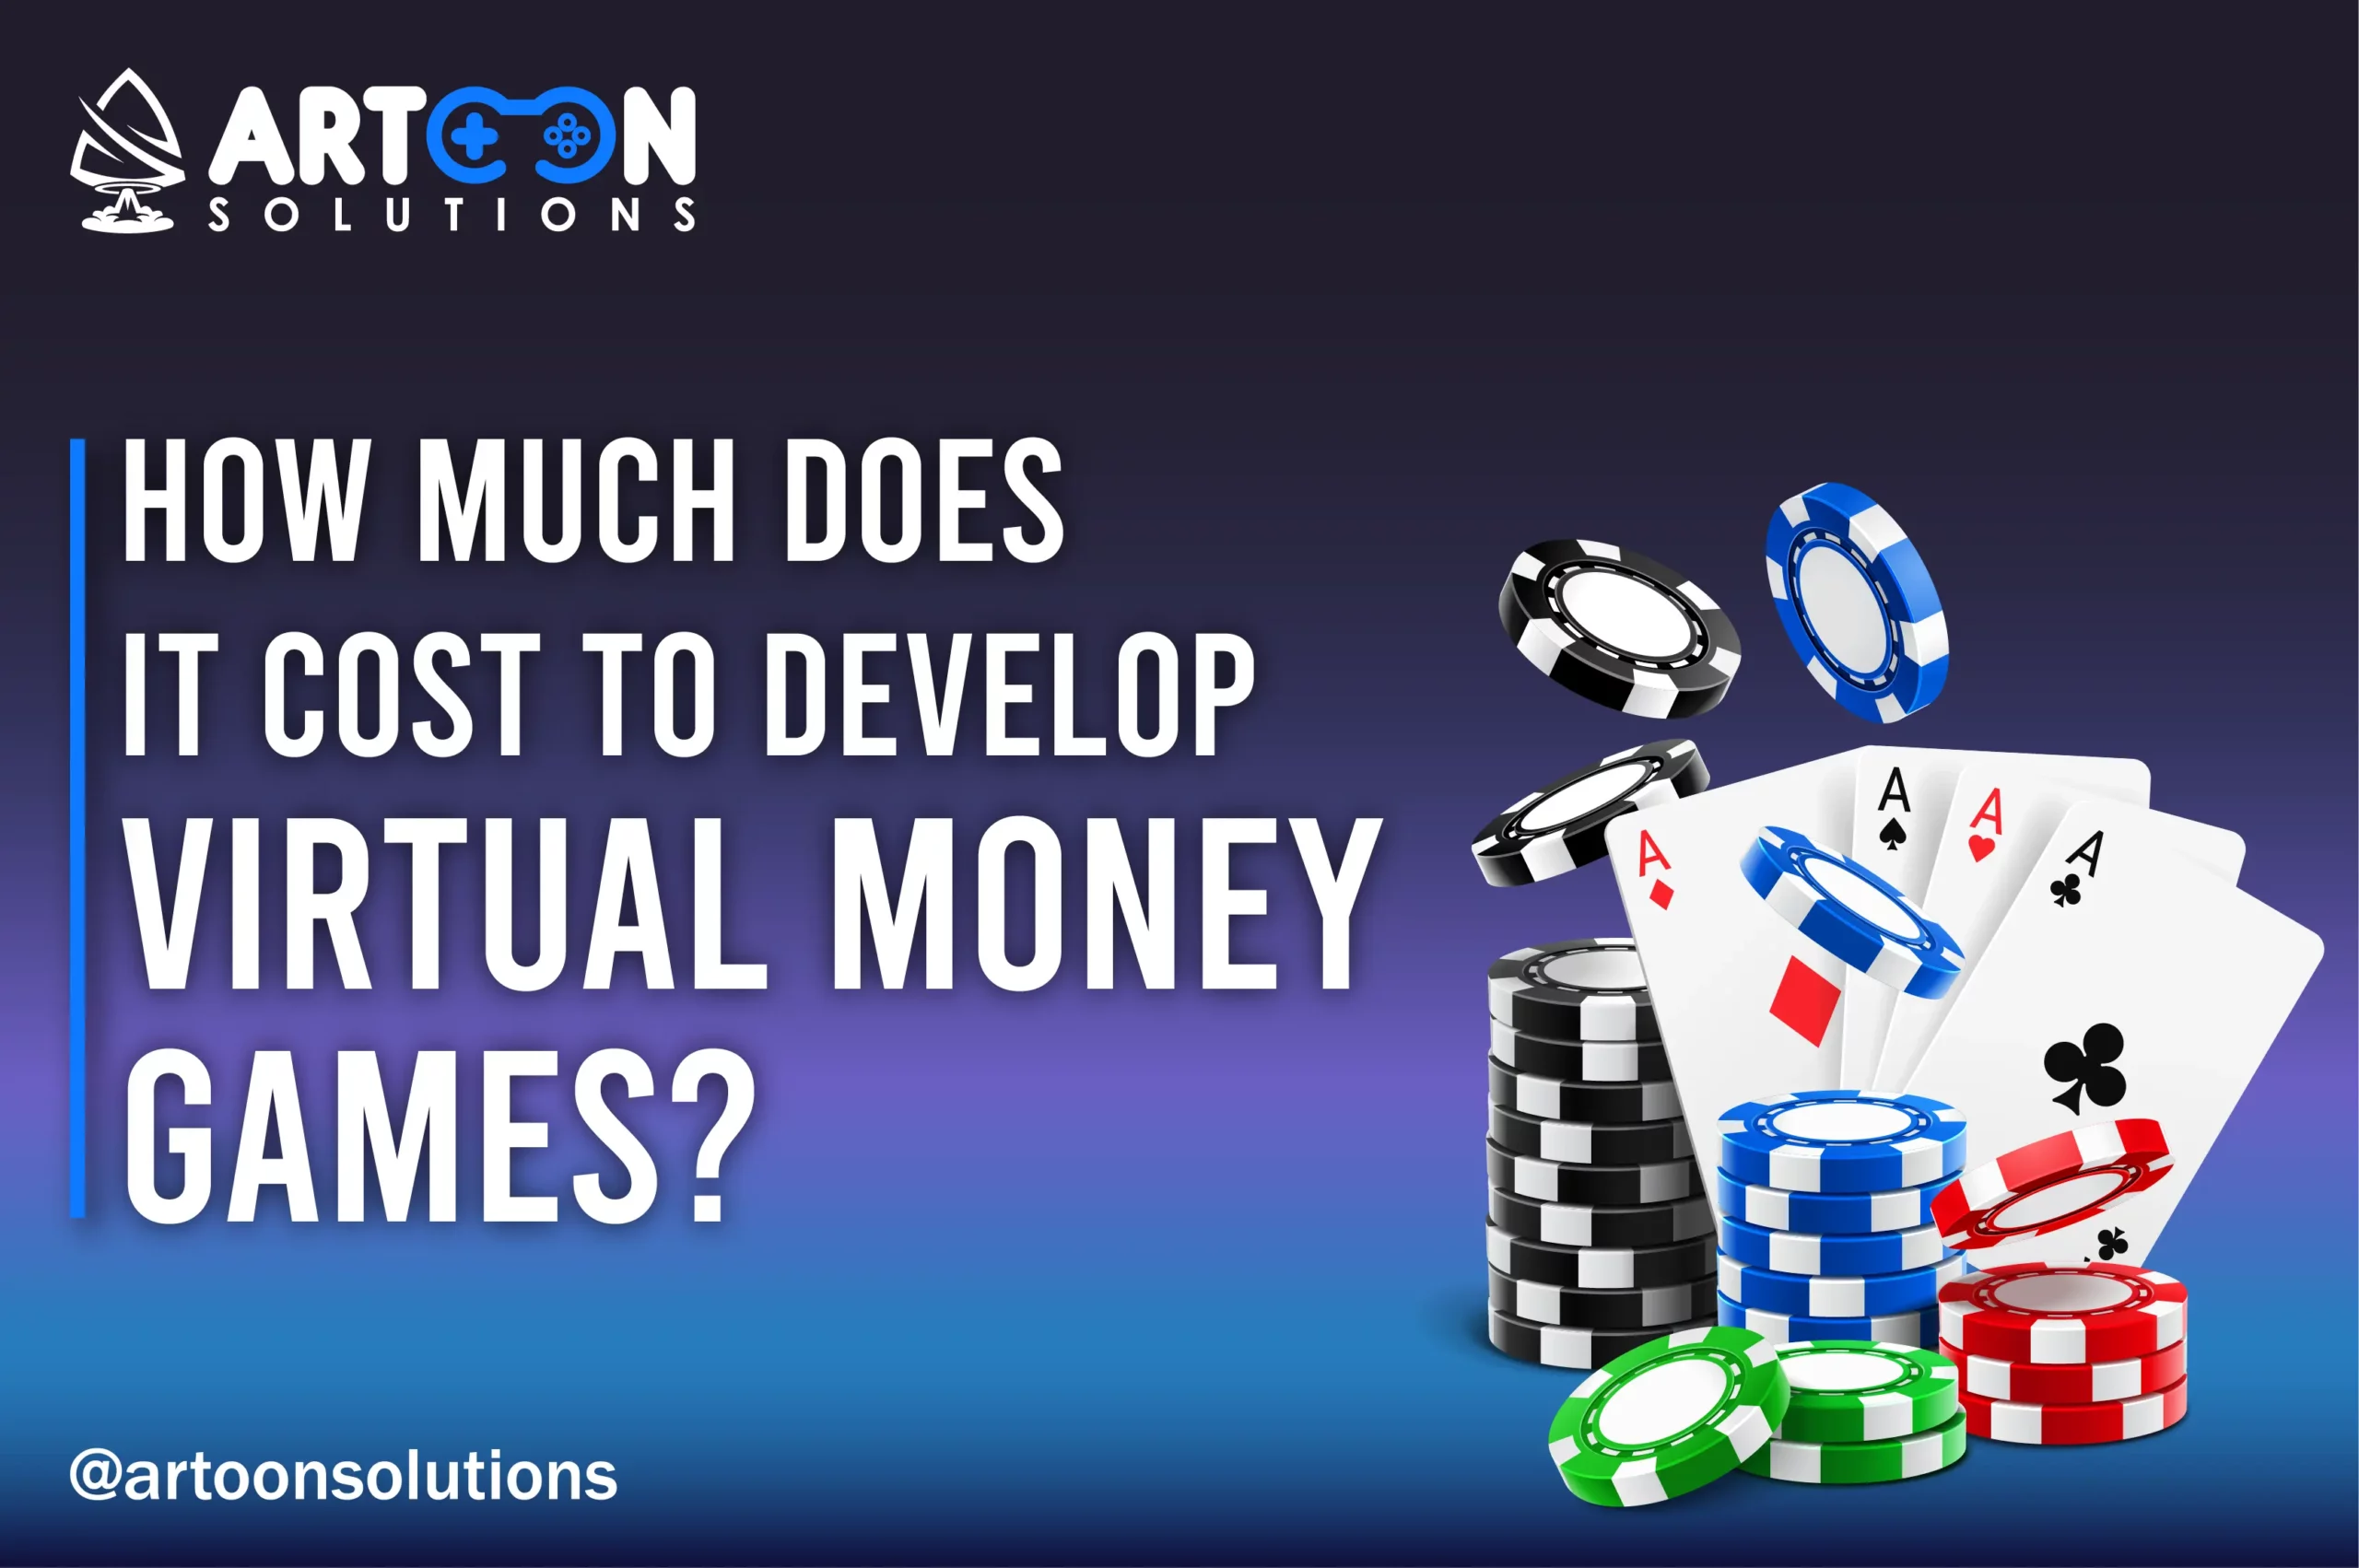 How Much Does it Cost To Develop Virtual Money Games